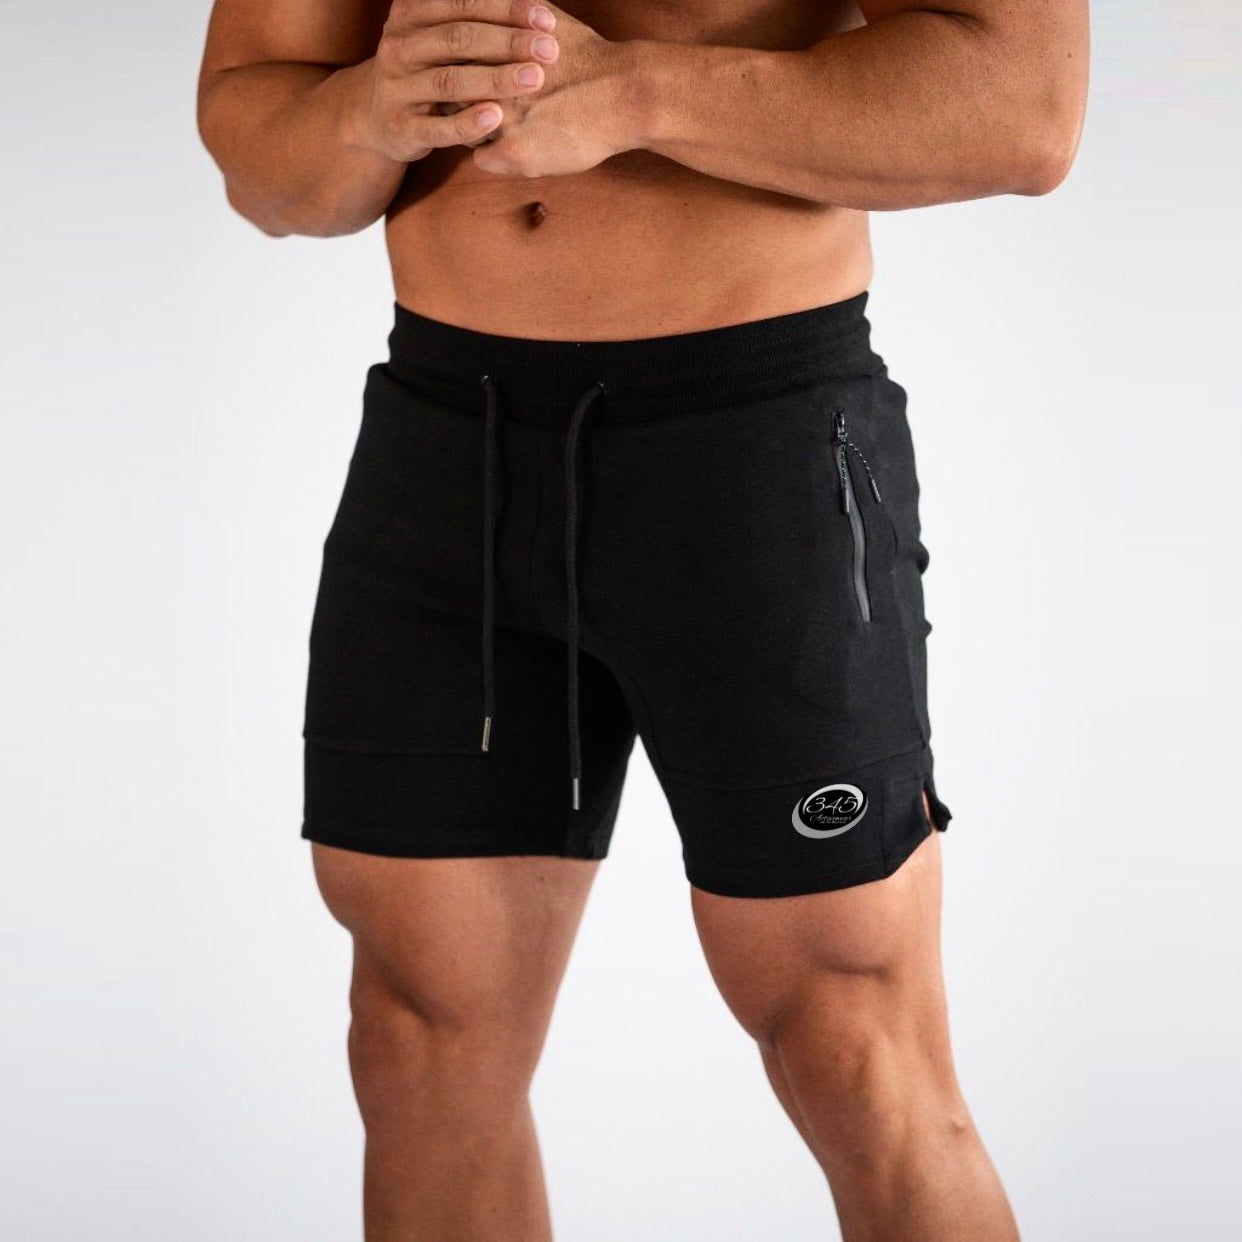 Men’s Solid Gym Workout Shorts